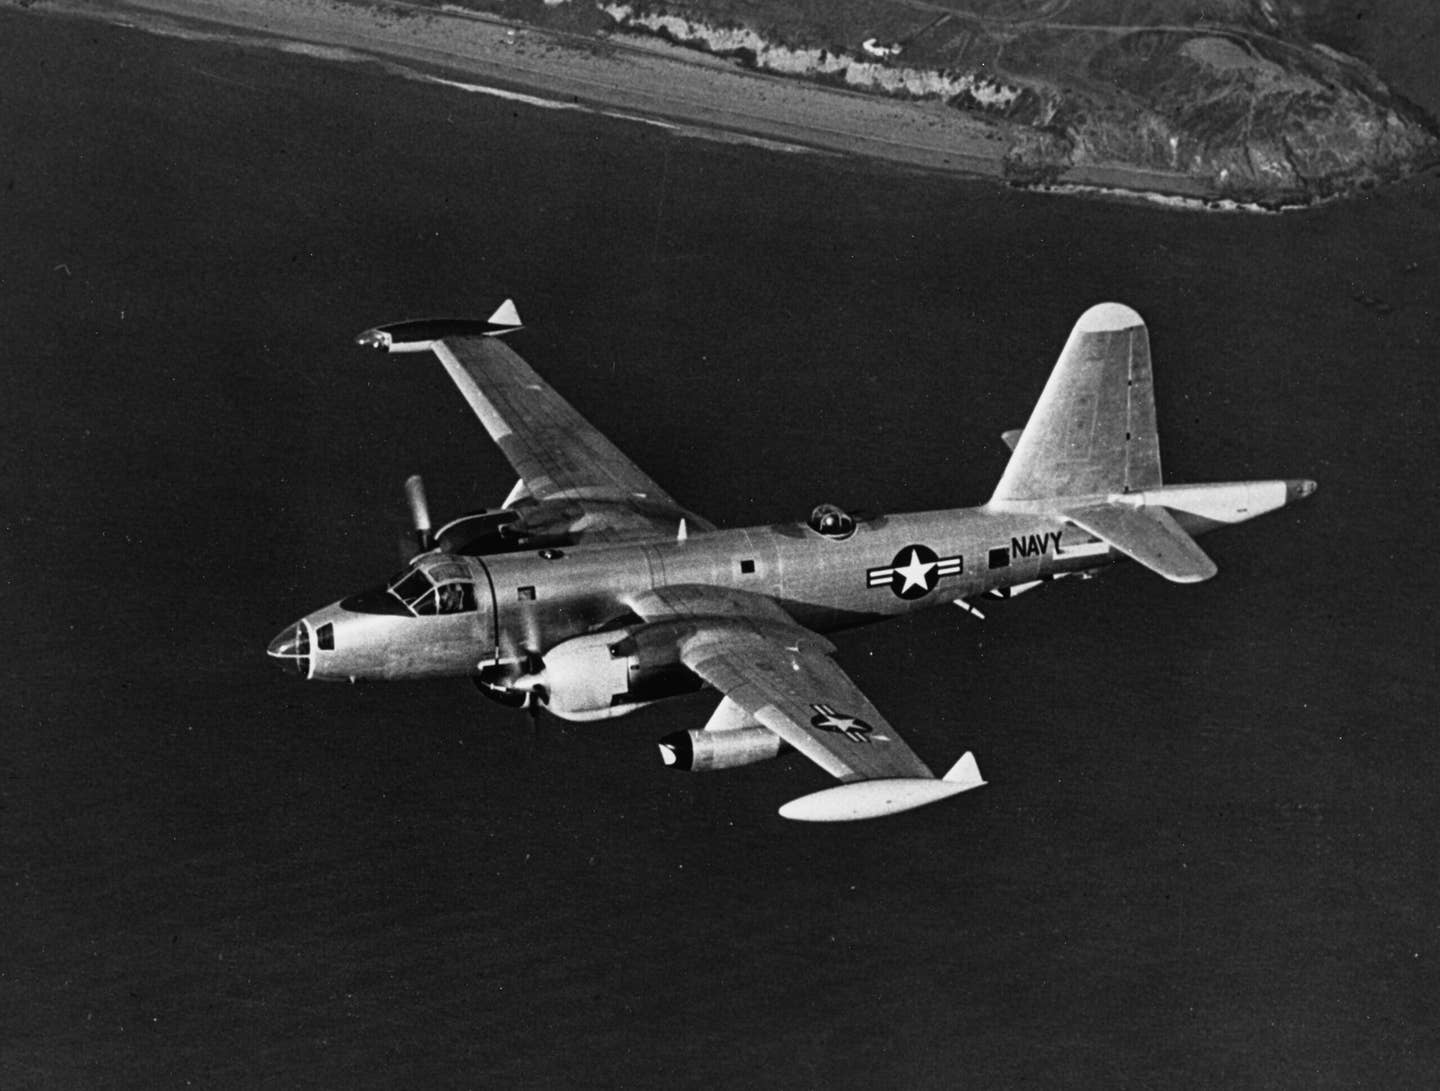 An early P2V-7&nbsp;Neptune&nbsp;delivered in natural metal finish. Note the two auxiliary J34 turbojets hanging from the outboard wings, which were used for takeoff, climb, and landing. <em>U.S. Navy</em>